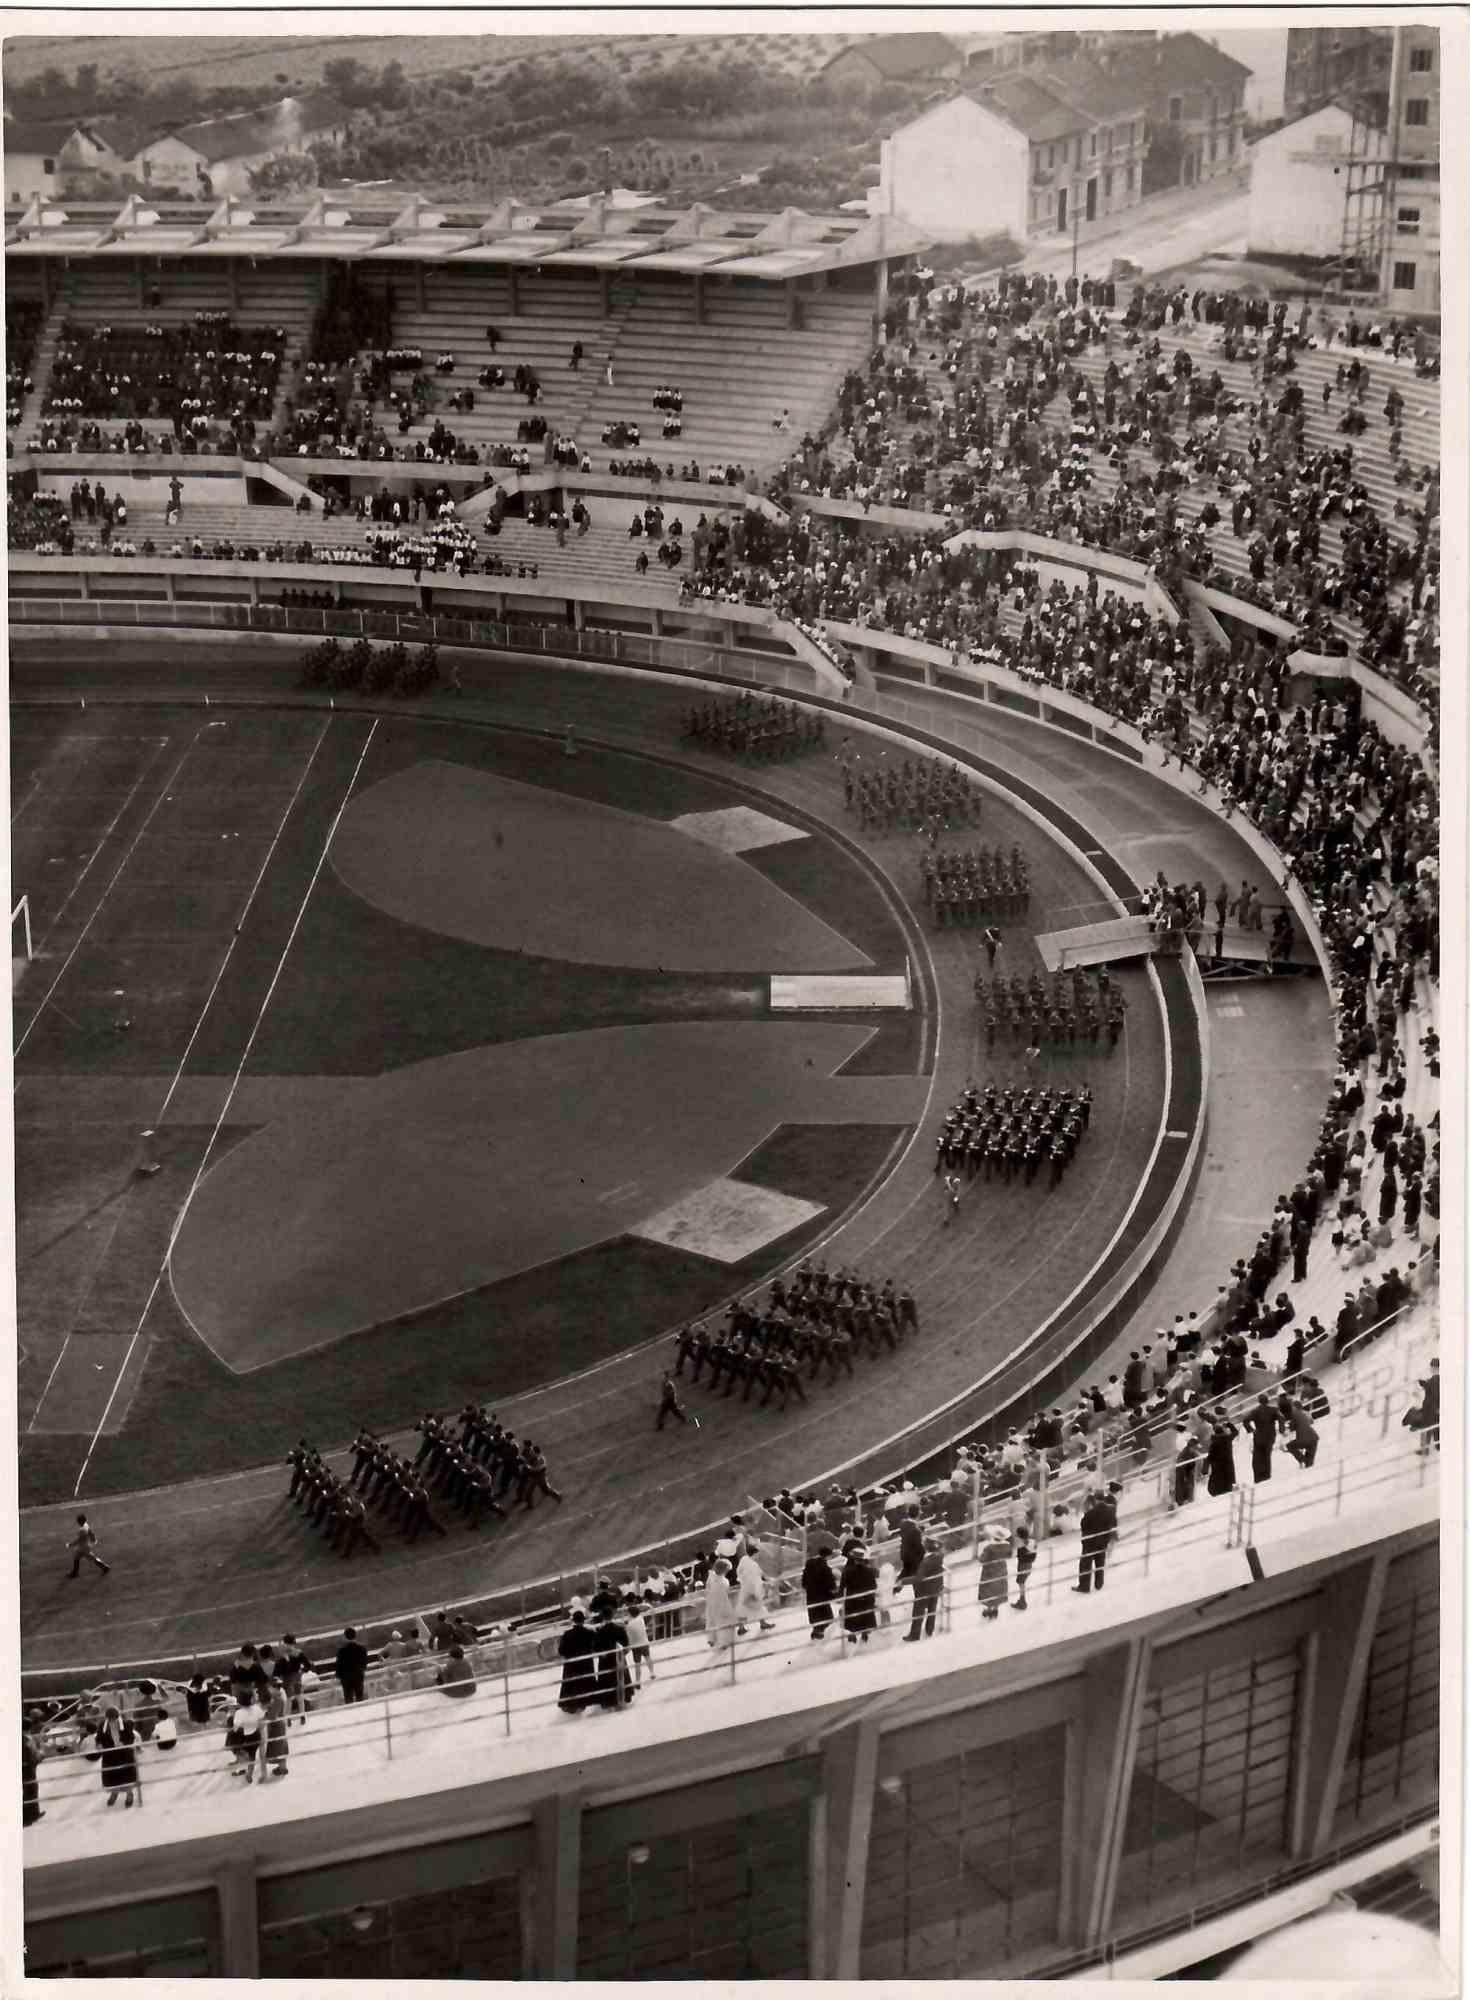 Unknown Figurative Photograph - Military Show in the Stadium - Vintage B/W photo - 1930s